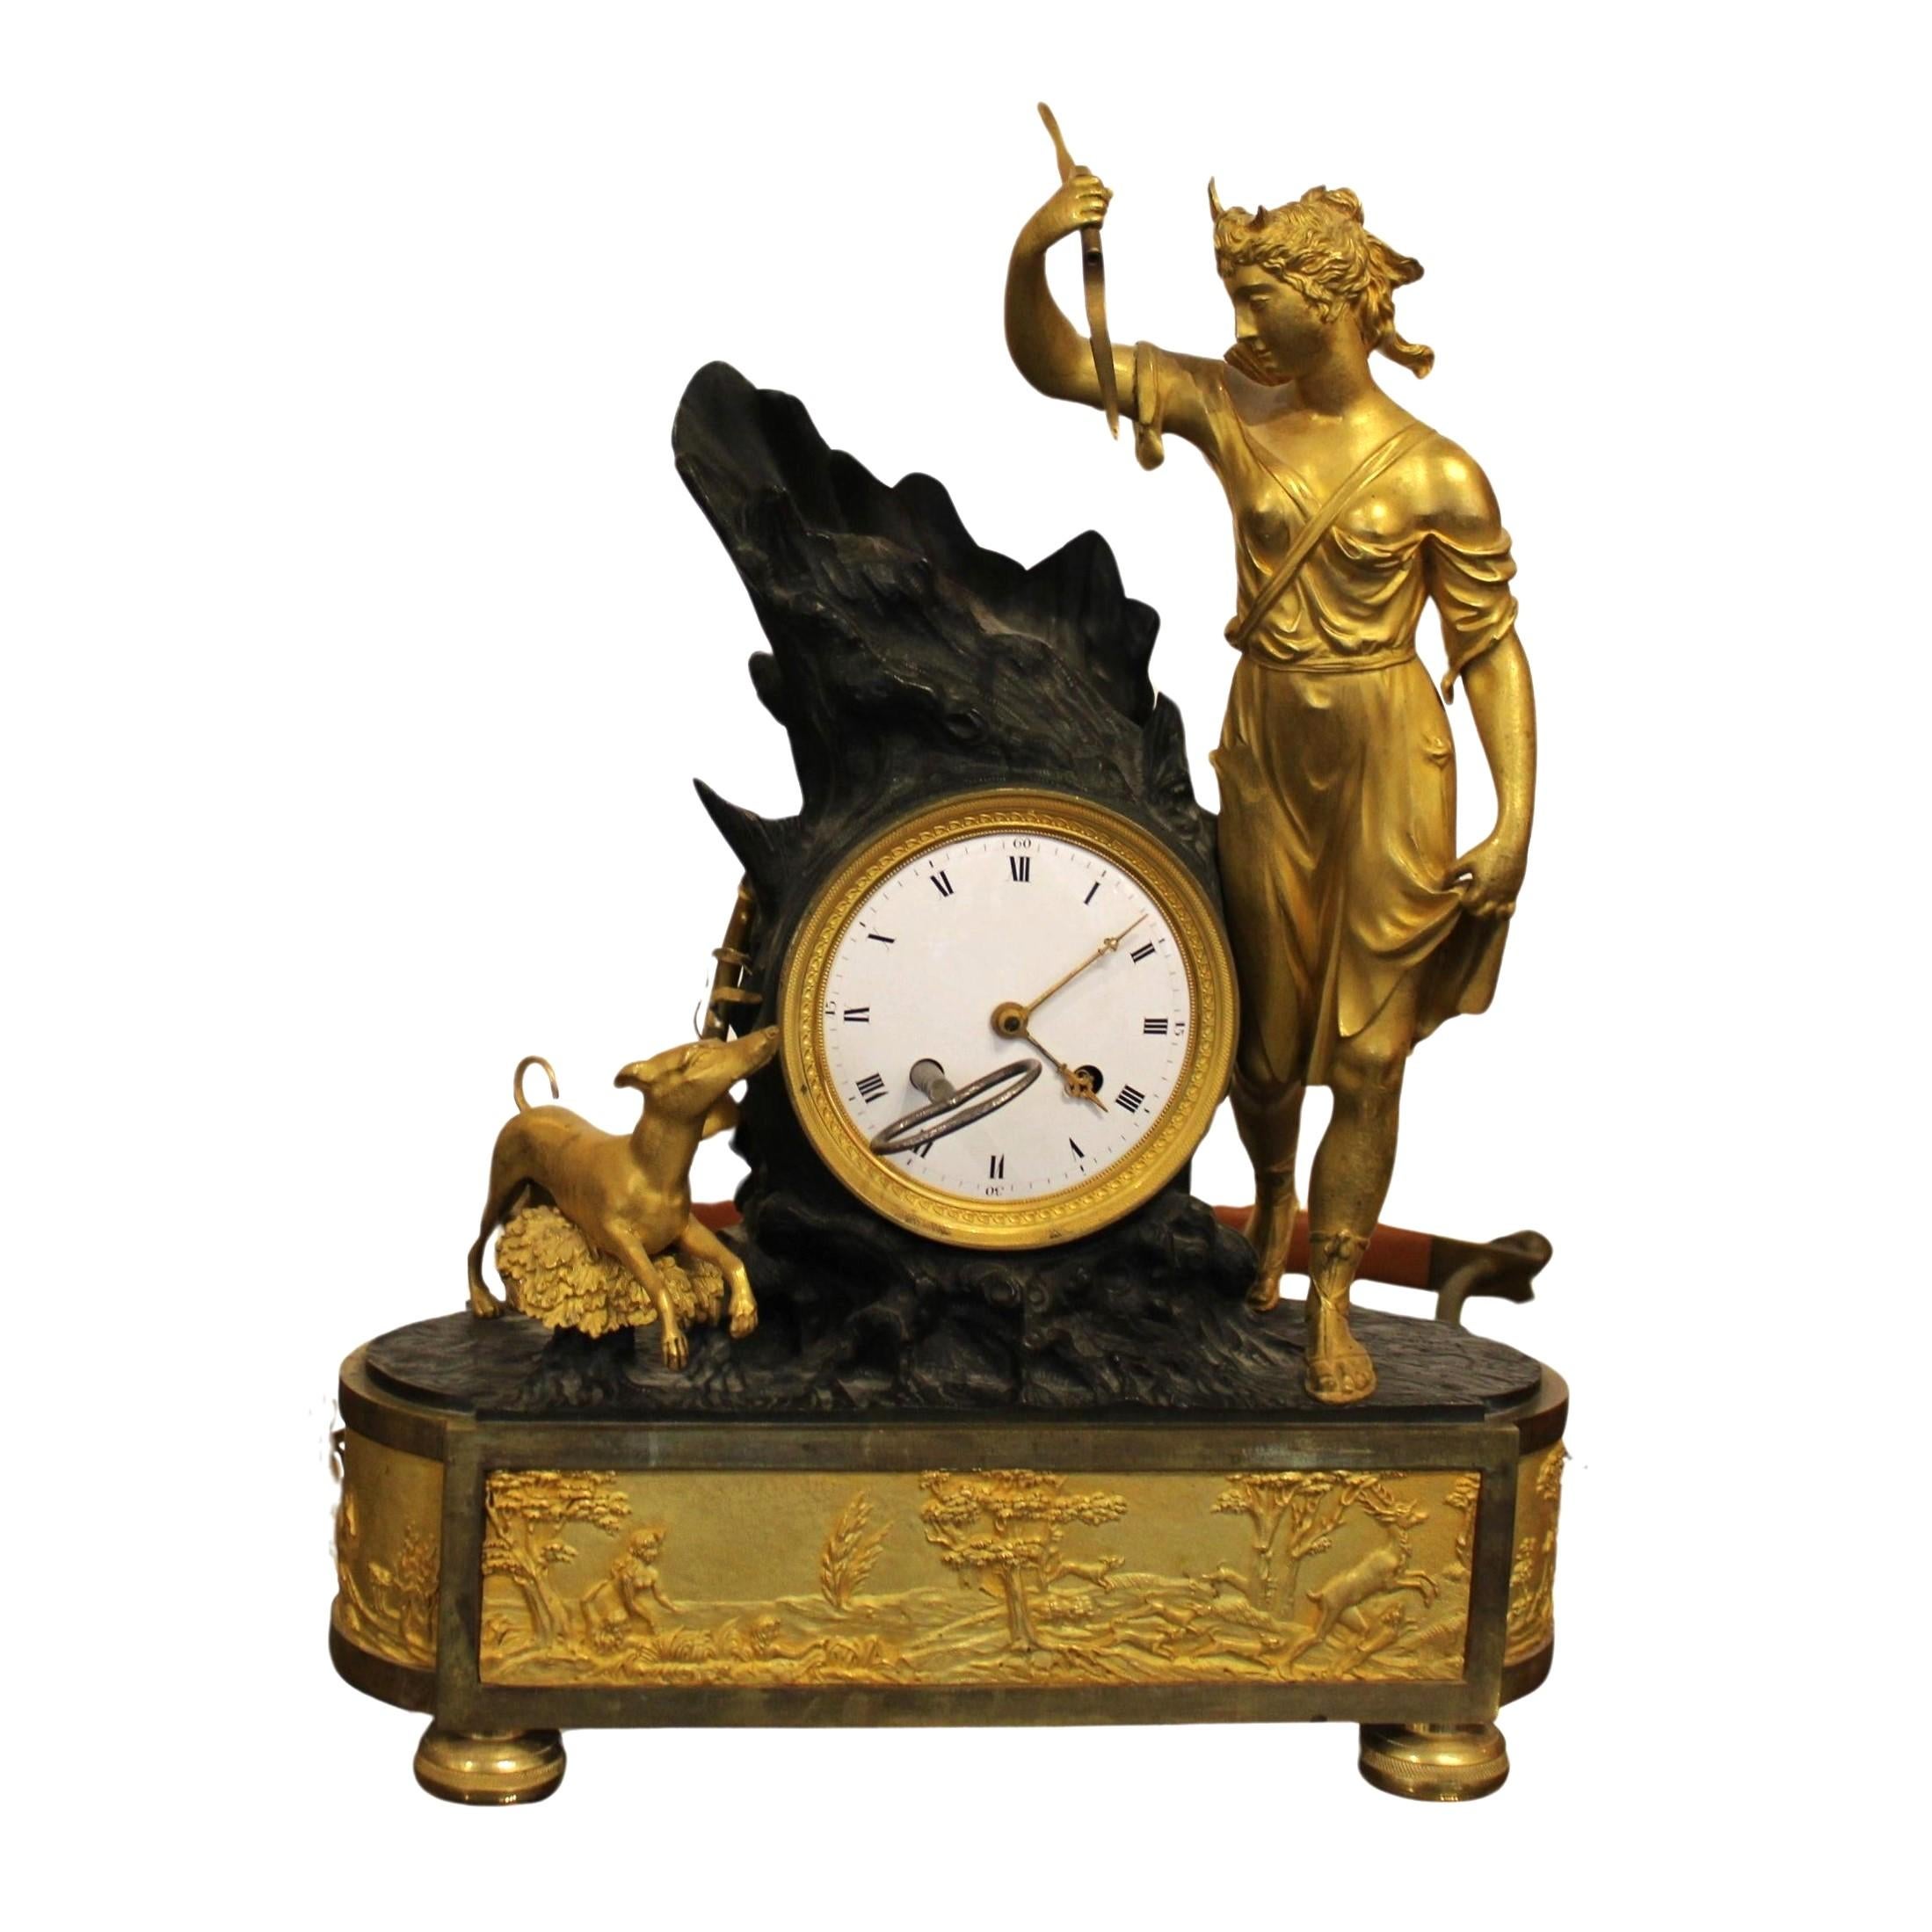 Gilded bronze clock representing Diana the Huntress
France, early 19th century